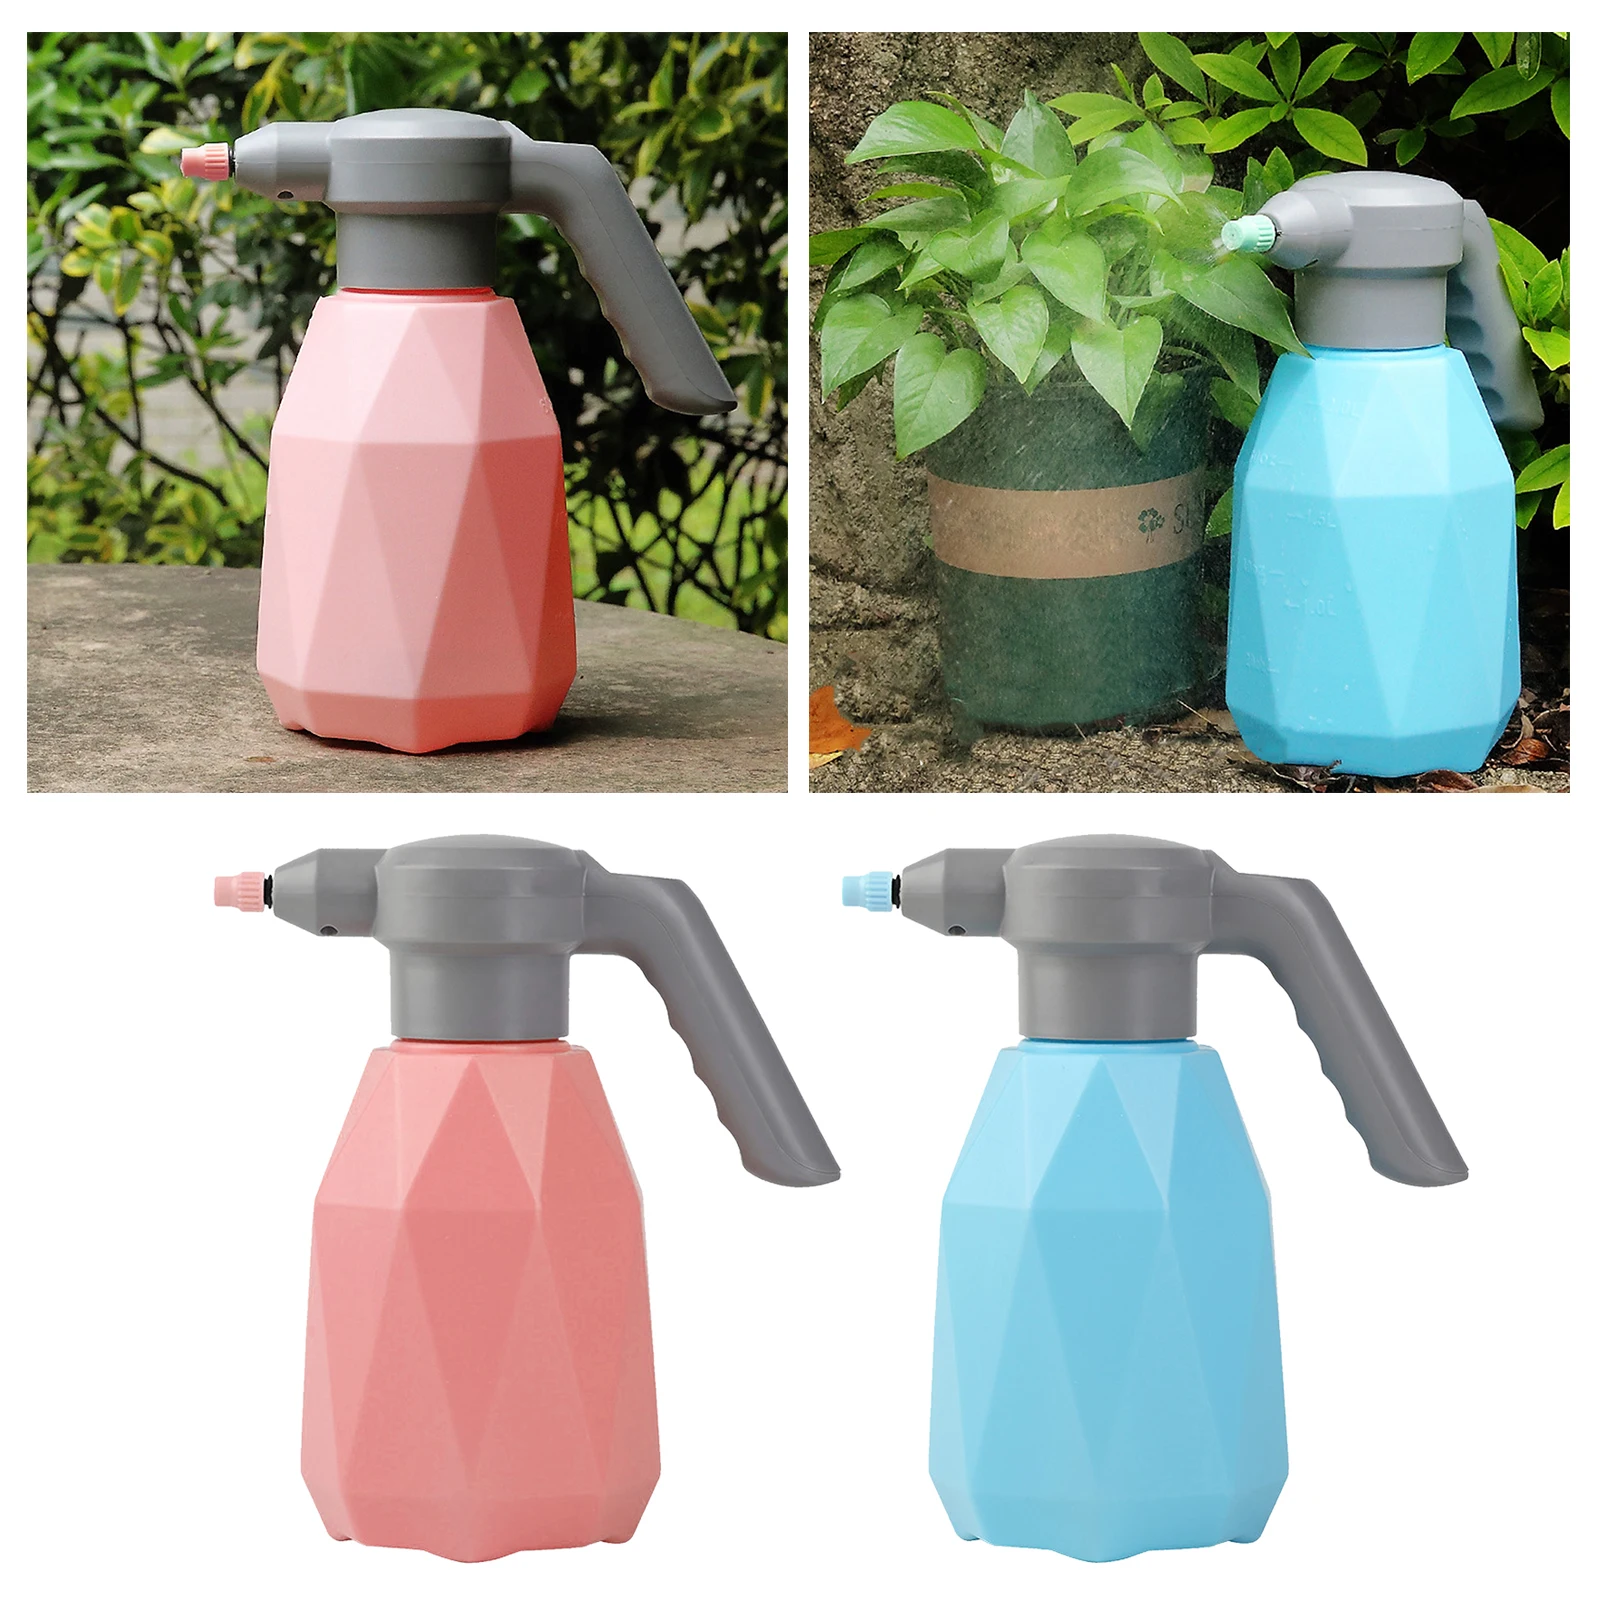 USB Rechrageable Electric Spray Bottle Handheld Automatic Watering Can Plant Mister Sprayer with Adjustable Nozzle 2L